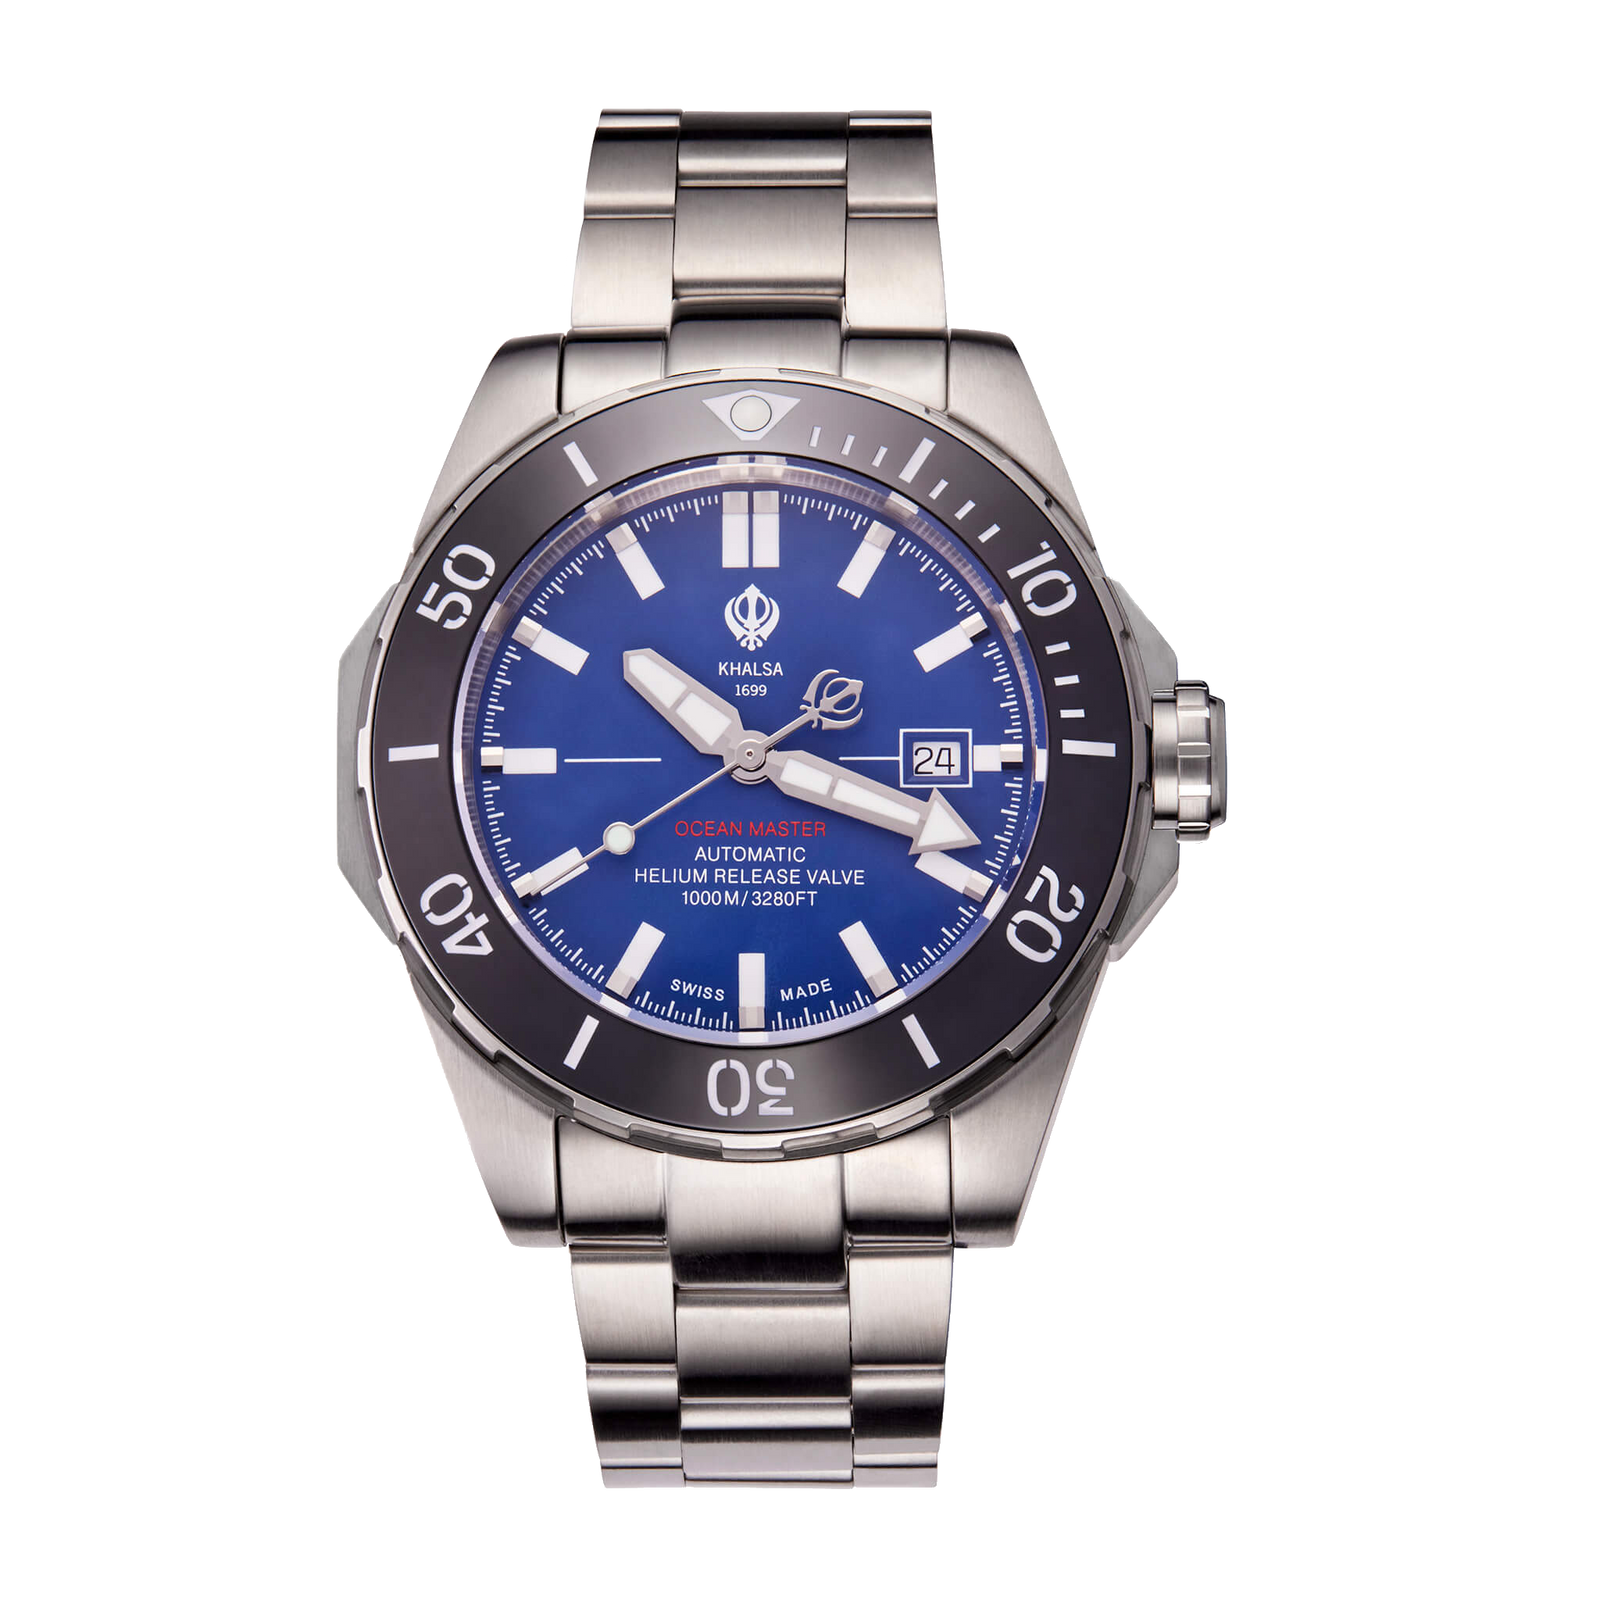 House of Khalsa Ocean Master Azure Blue Men's Luxury Sikh Swiss Dive Watch with Khanda Symbol - Class and Style Combined